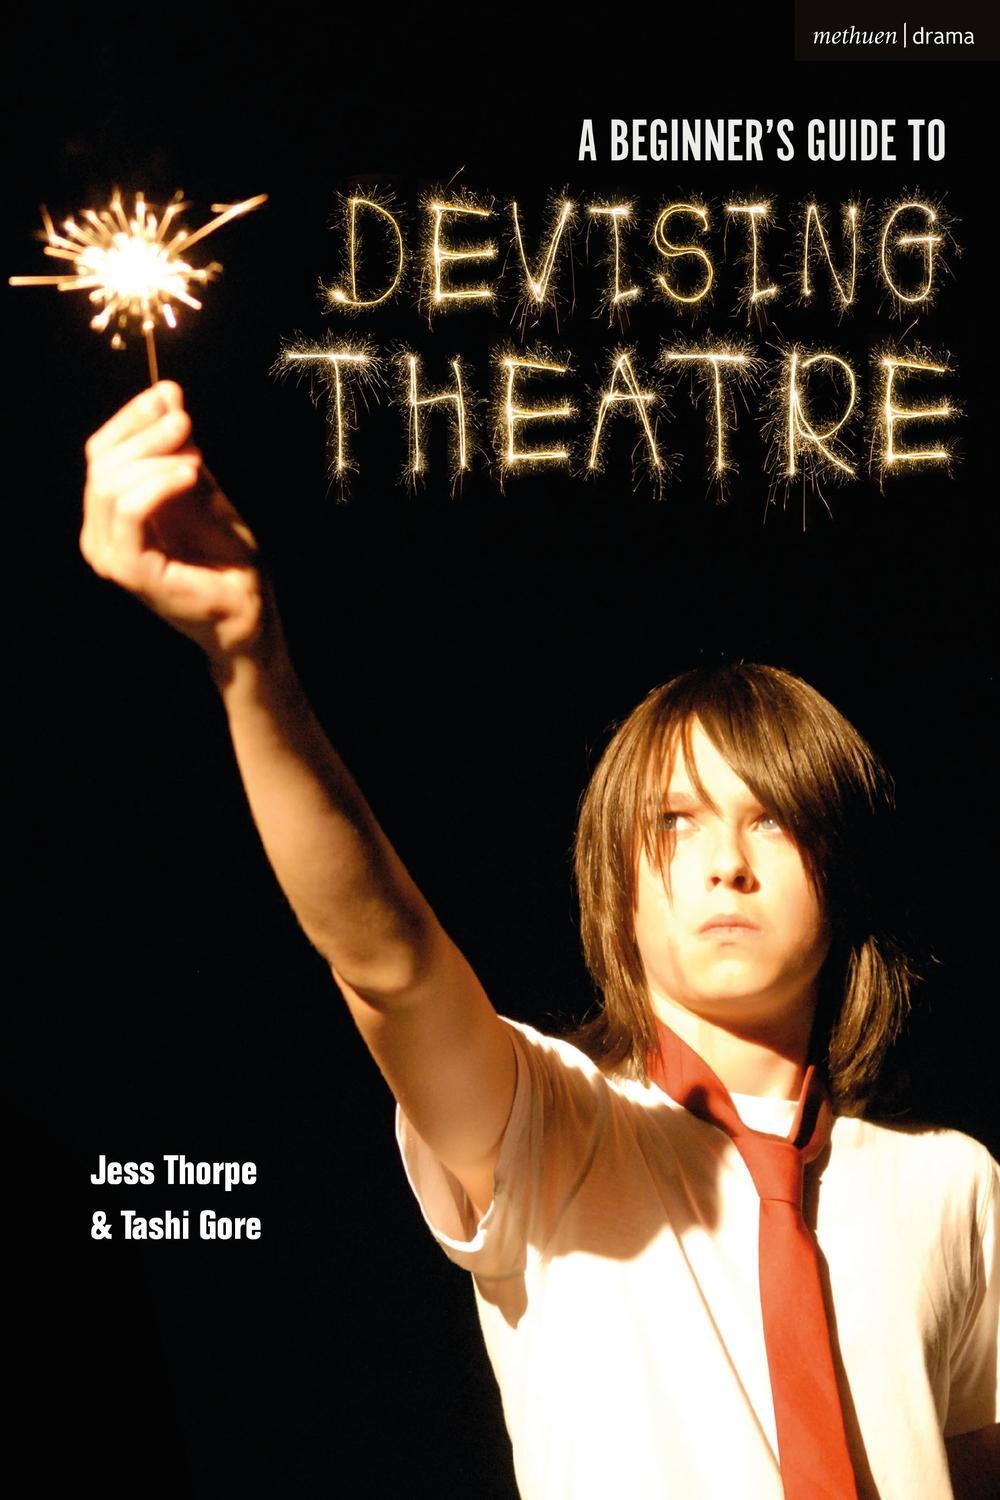 Beginner's Guide to Devising Theatre - Jess Thorpe